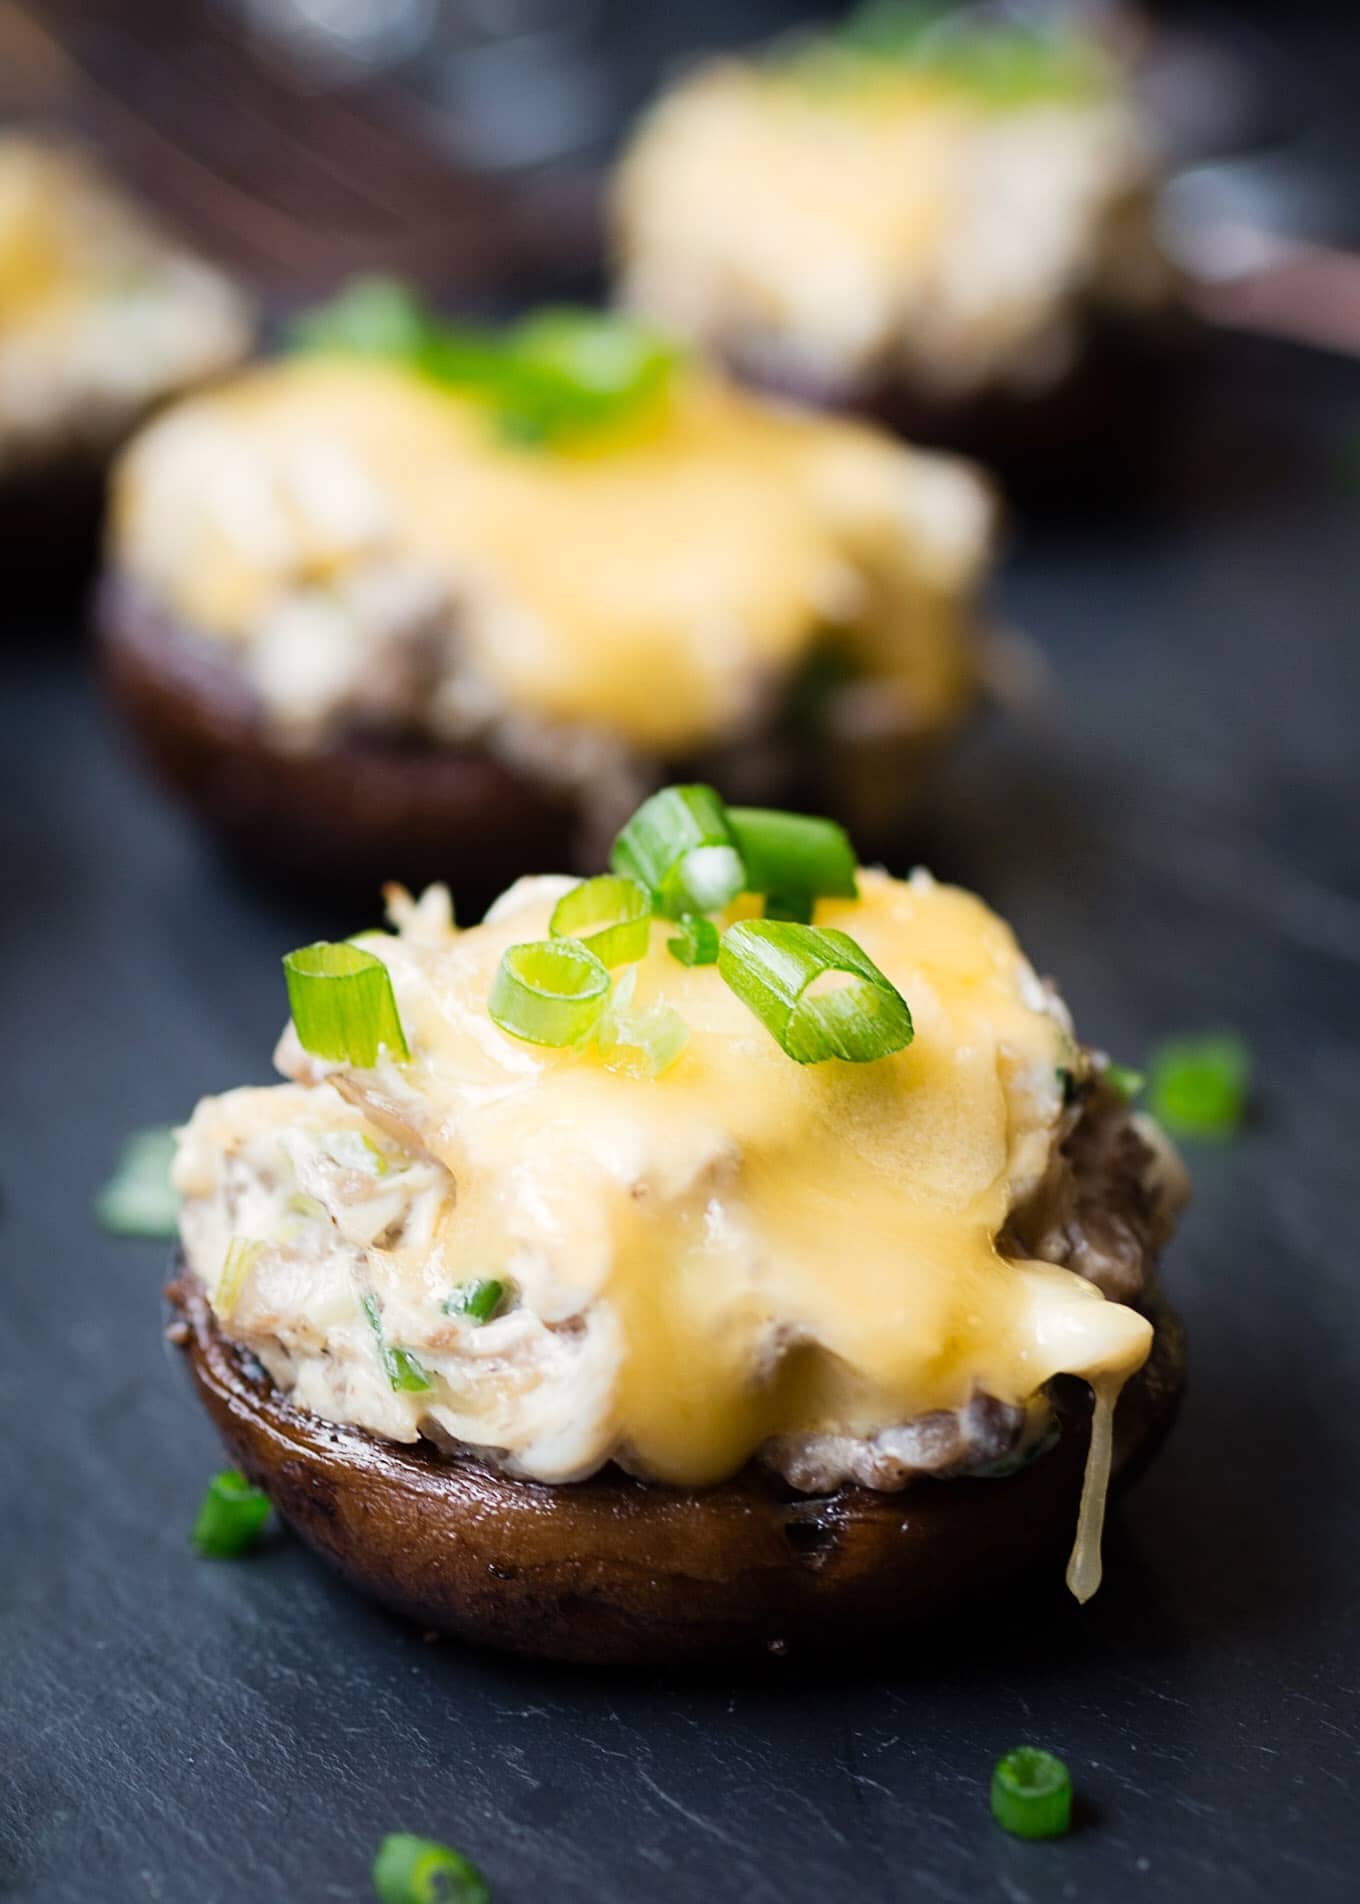 Crab Stuffed Mushrooms With Gouda Striped Spatula,Fried Green Tomatoes Cast